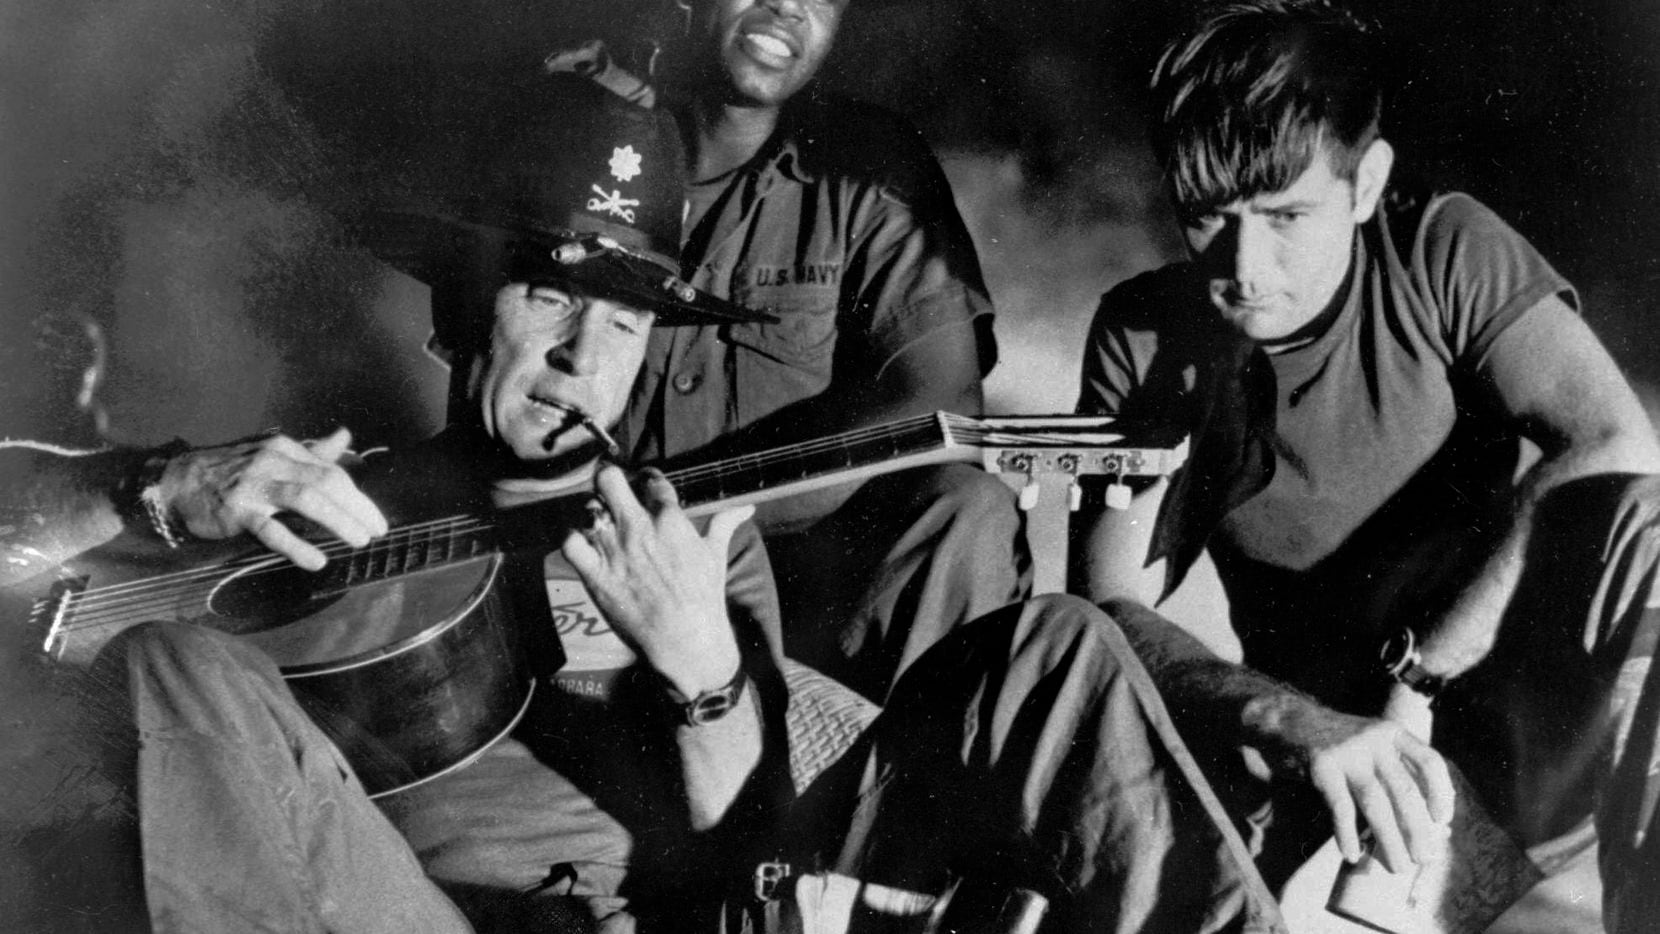 In this undated file photo released by United Artists, from left, Robert Duvall as Lt. Col. Kilgore, Albert Hall as Chief and Martin Sheen as Capt. Willard, are shown in the film 'Apocalypse Now.'